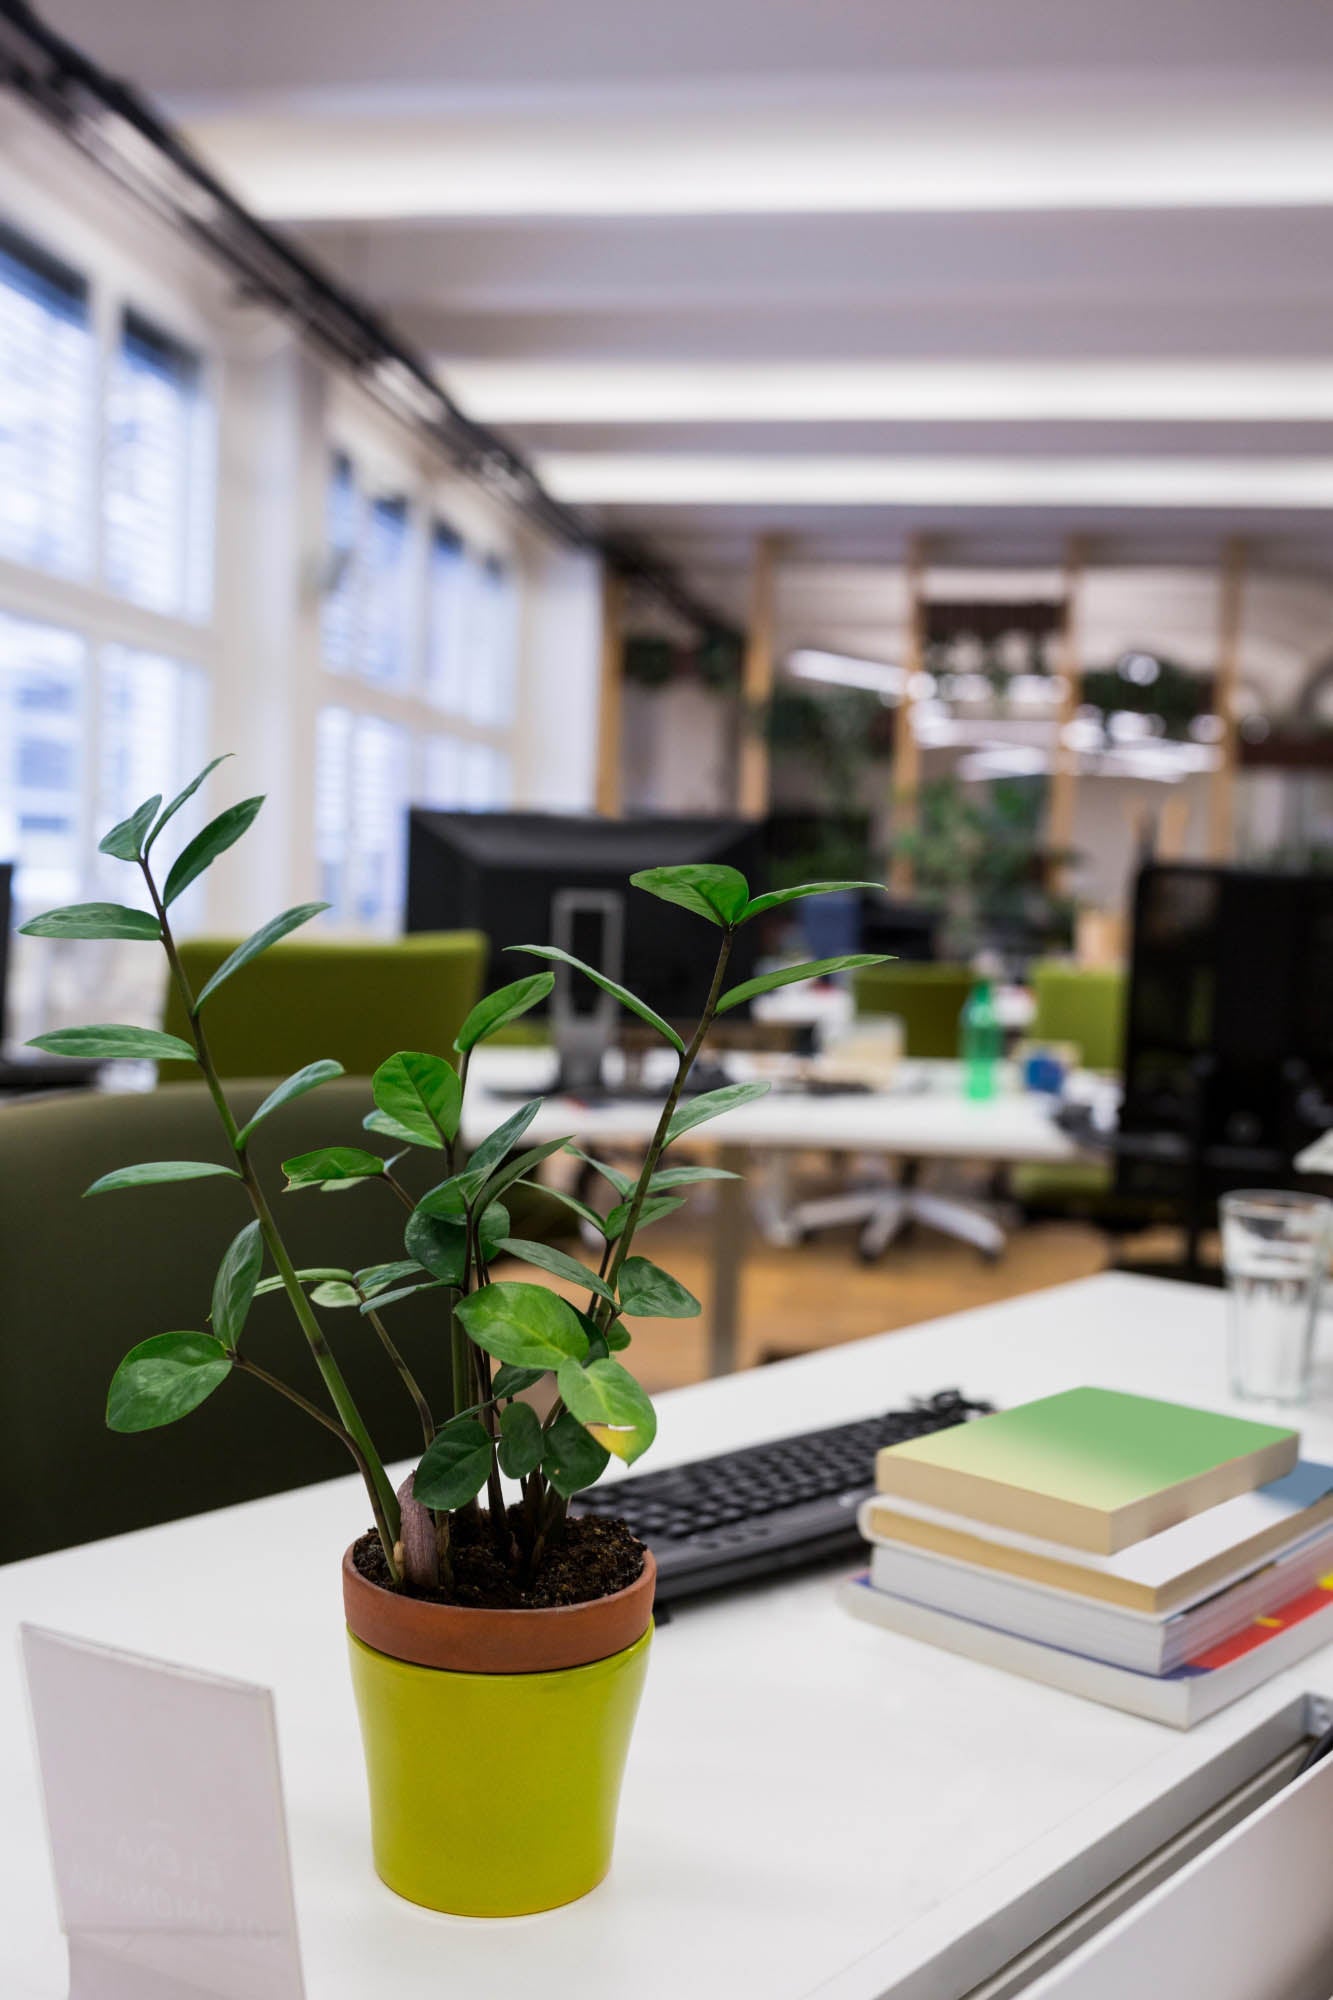 A pot plant on a desk in an office environment